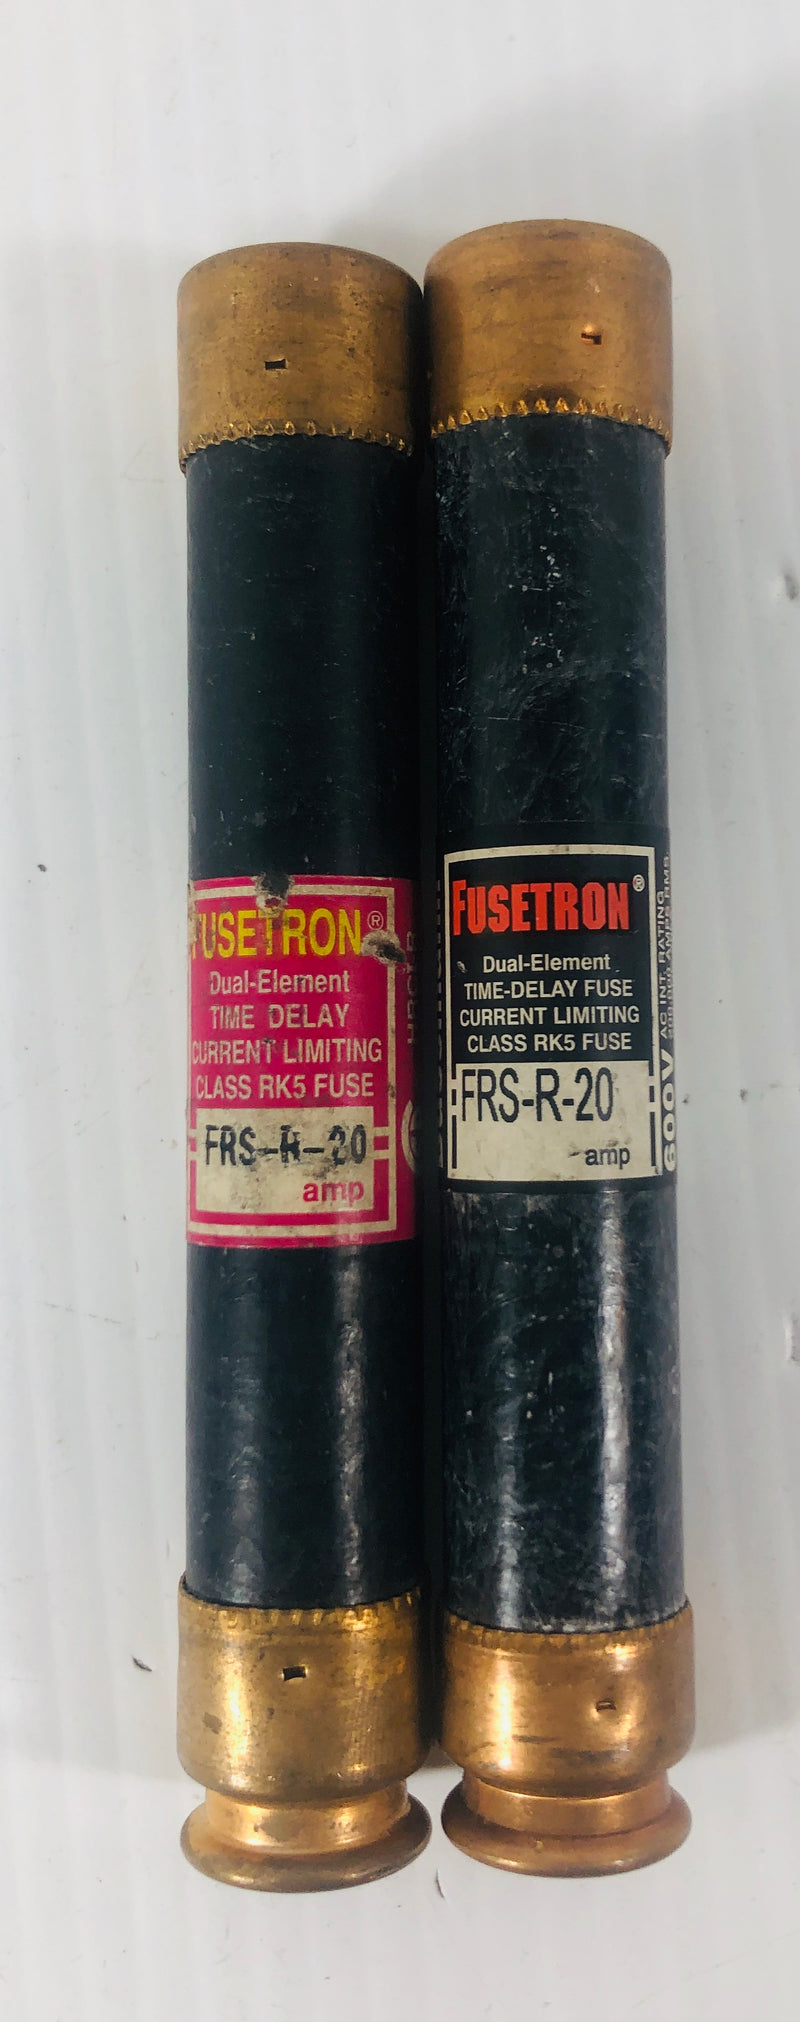 Fusetron Dual Element Fuse FRS-R-20 (Lot of 2)